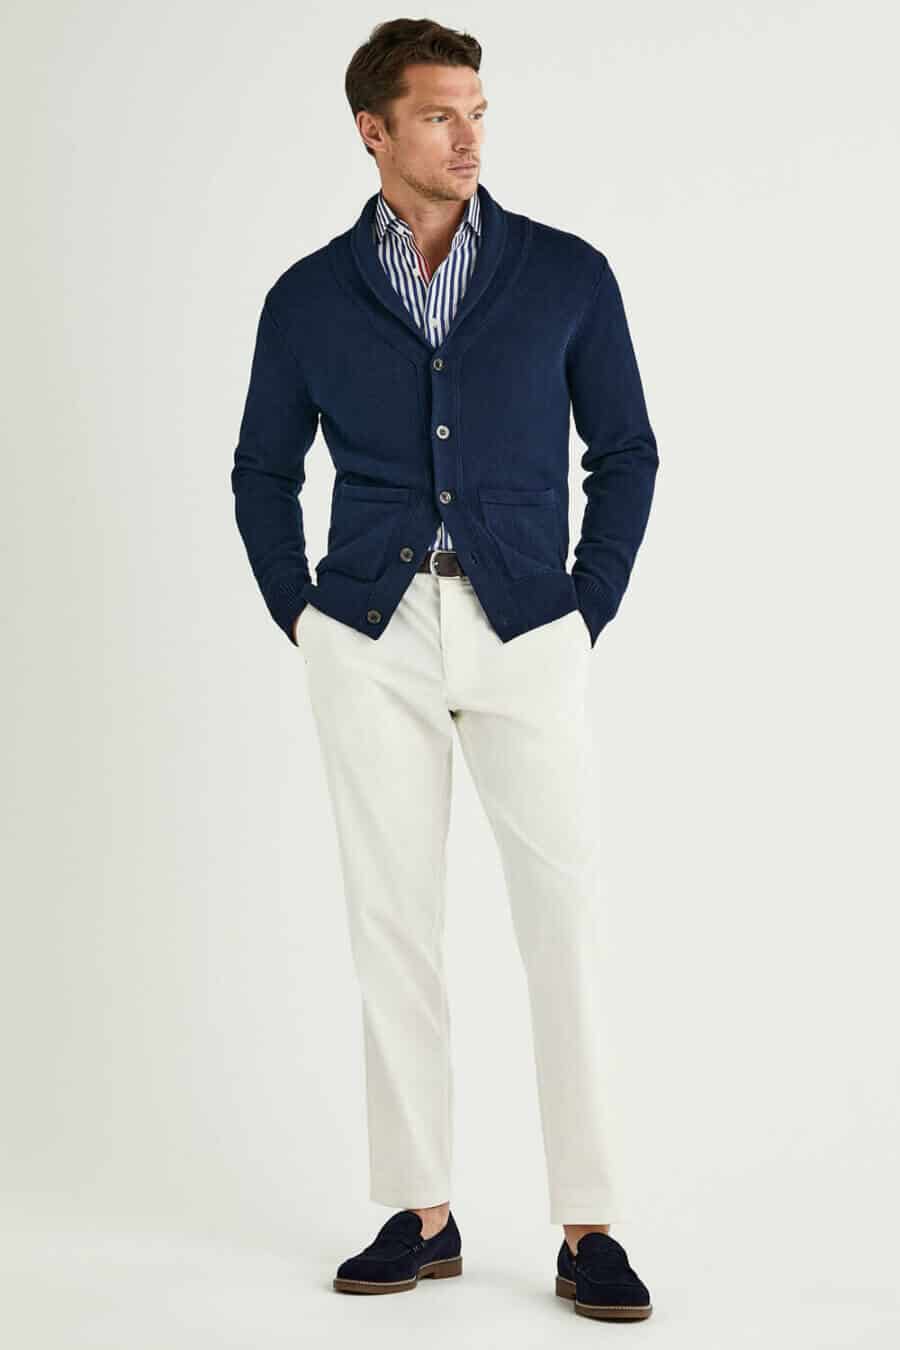 Men's summer shawl collar cardigan, white and blue striped shirt, white trousers and navy suede penny loafers outfit